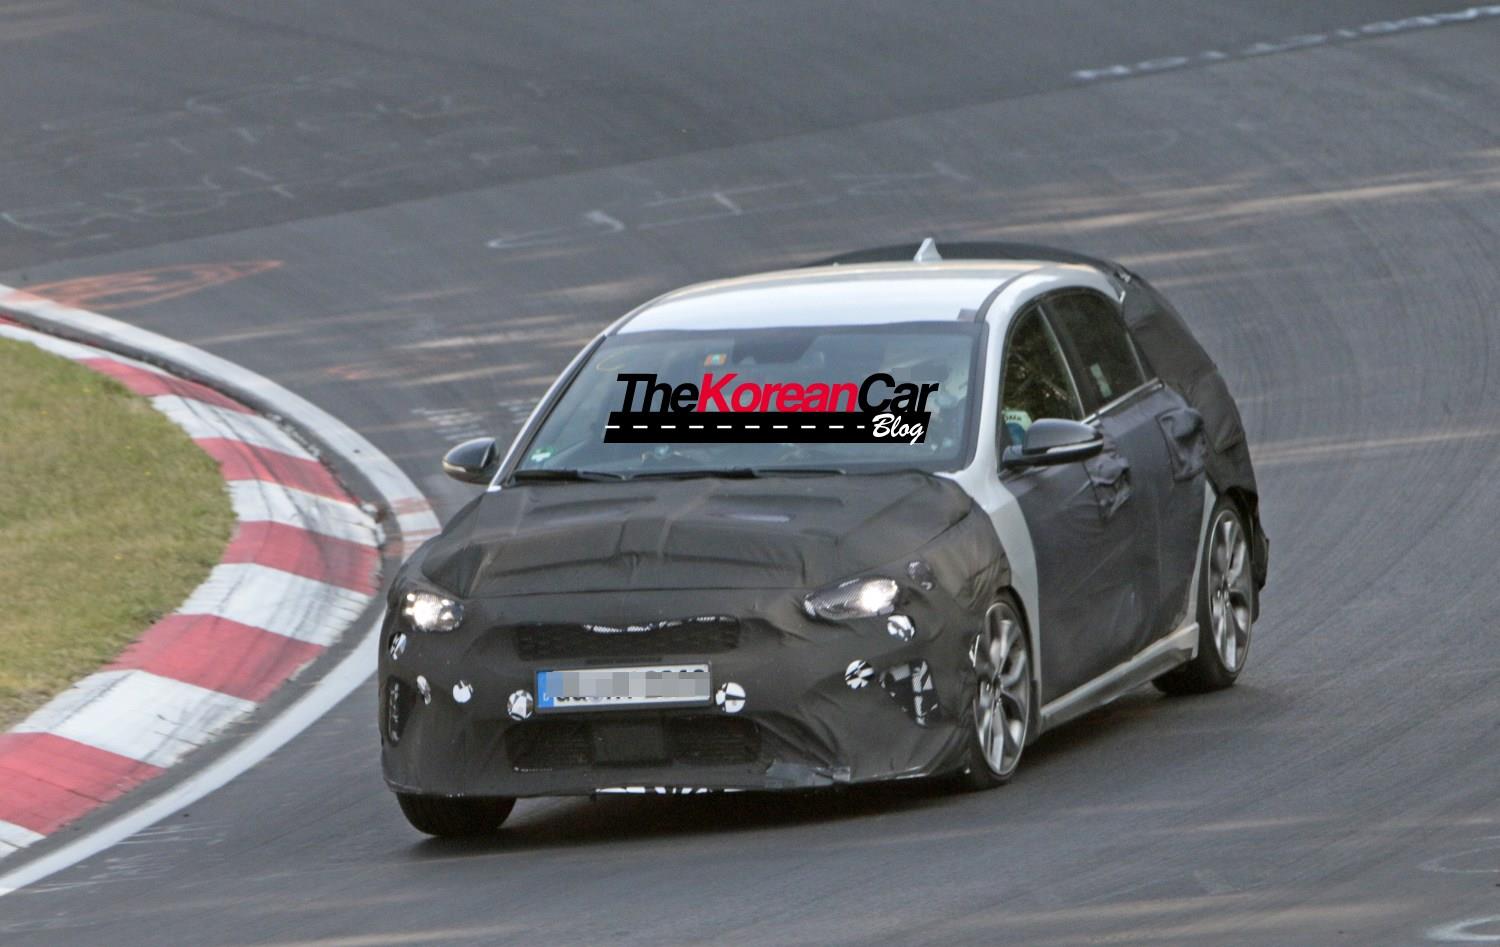 Kia Ceed GT 2019 (N-performance) is the most anticipated new product of this year